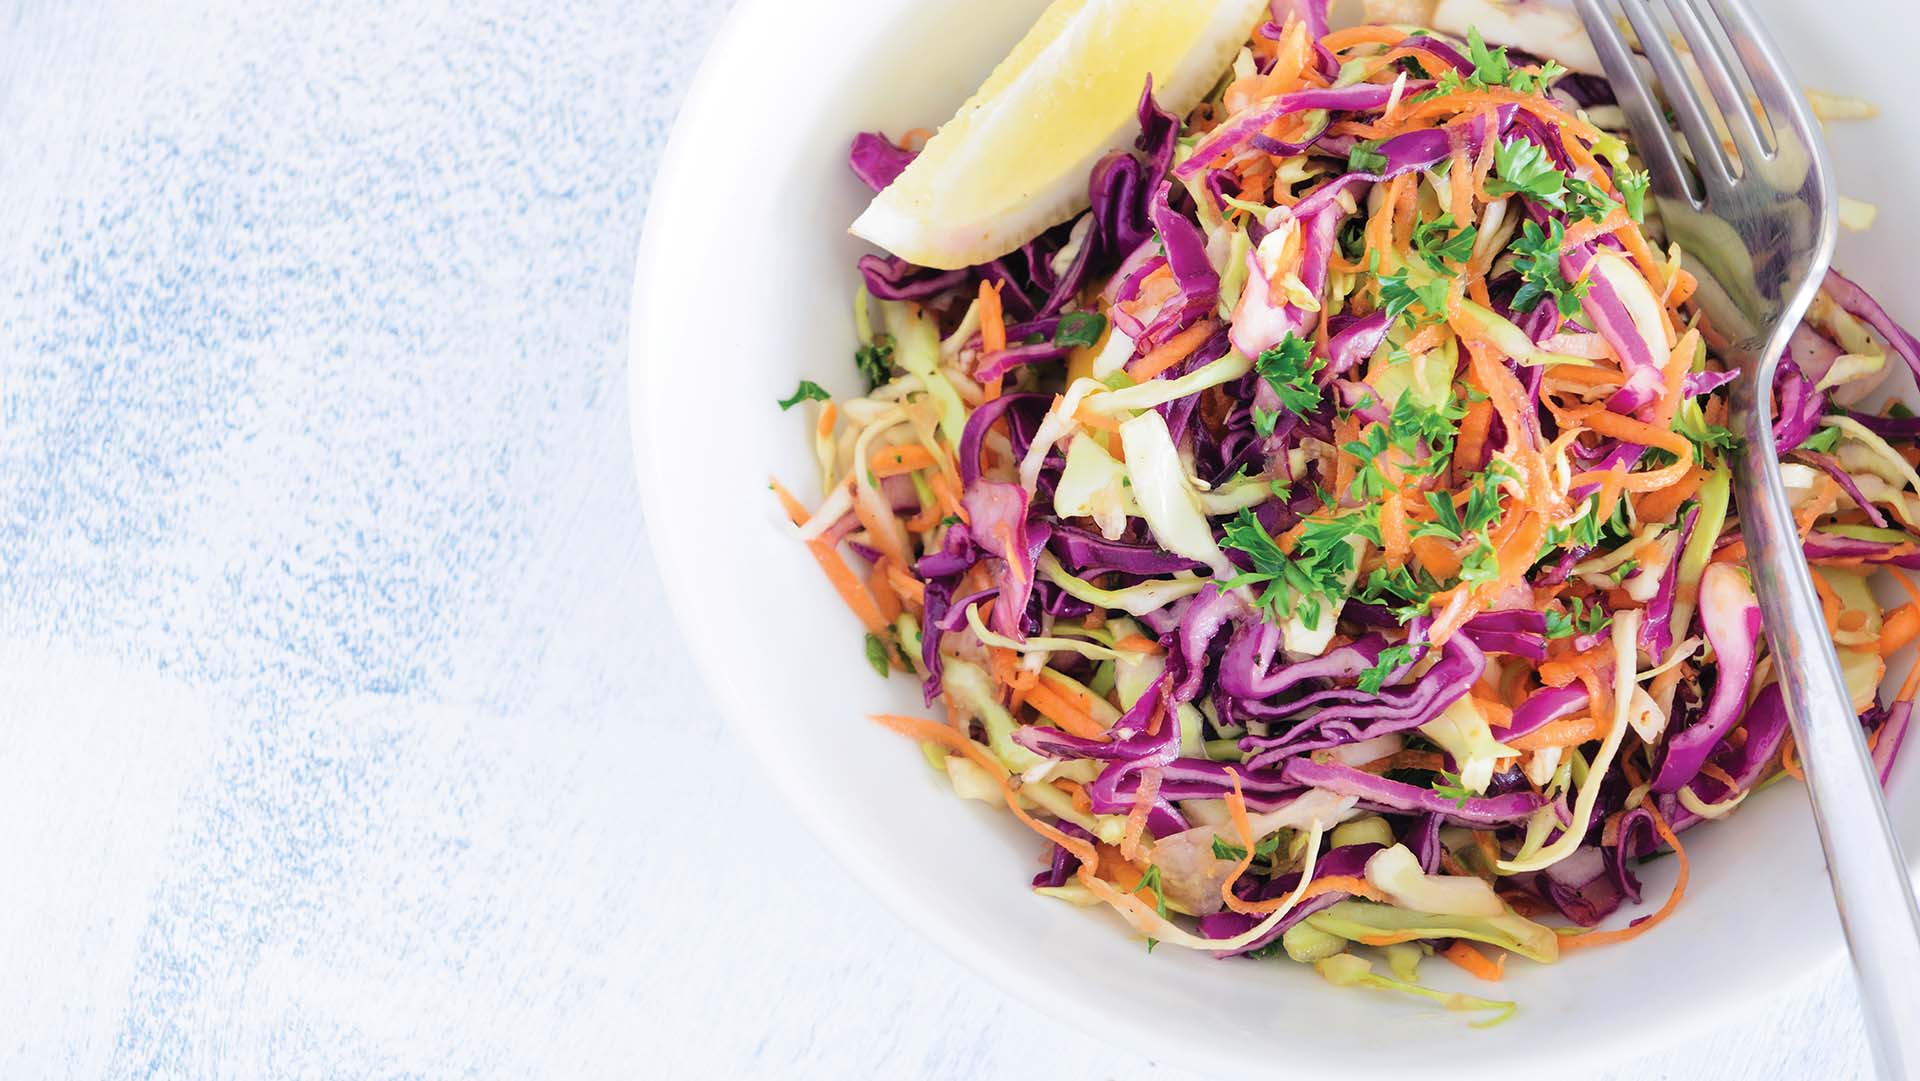 Serving of coleslaw a healthy vibrant colourful salad made with shredded raw cabbage, carrots and onions